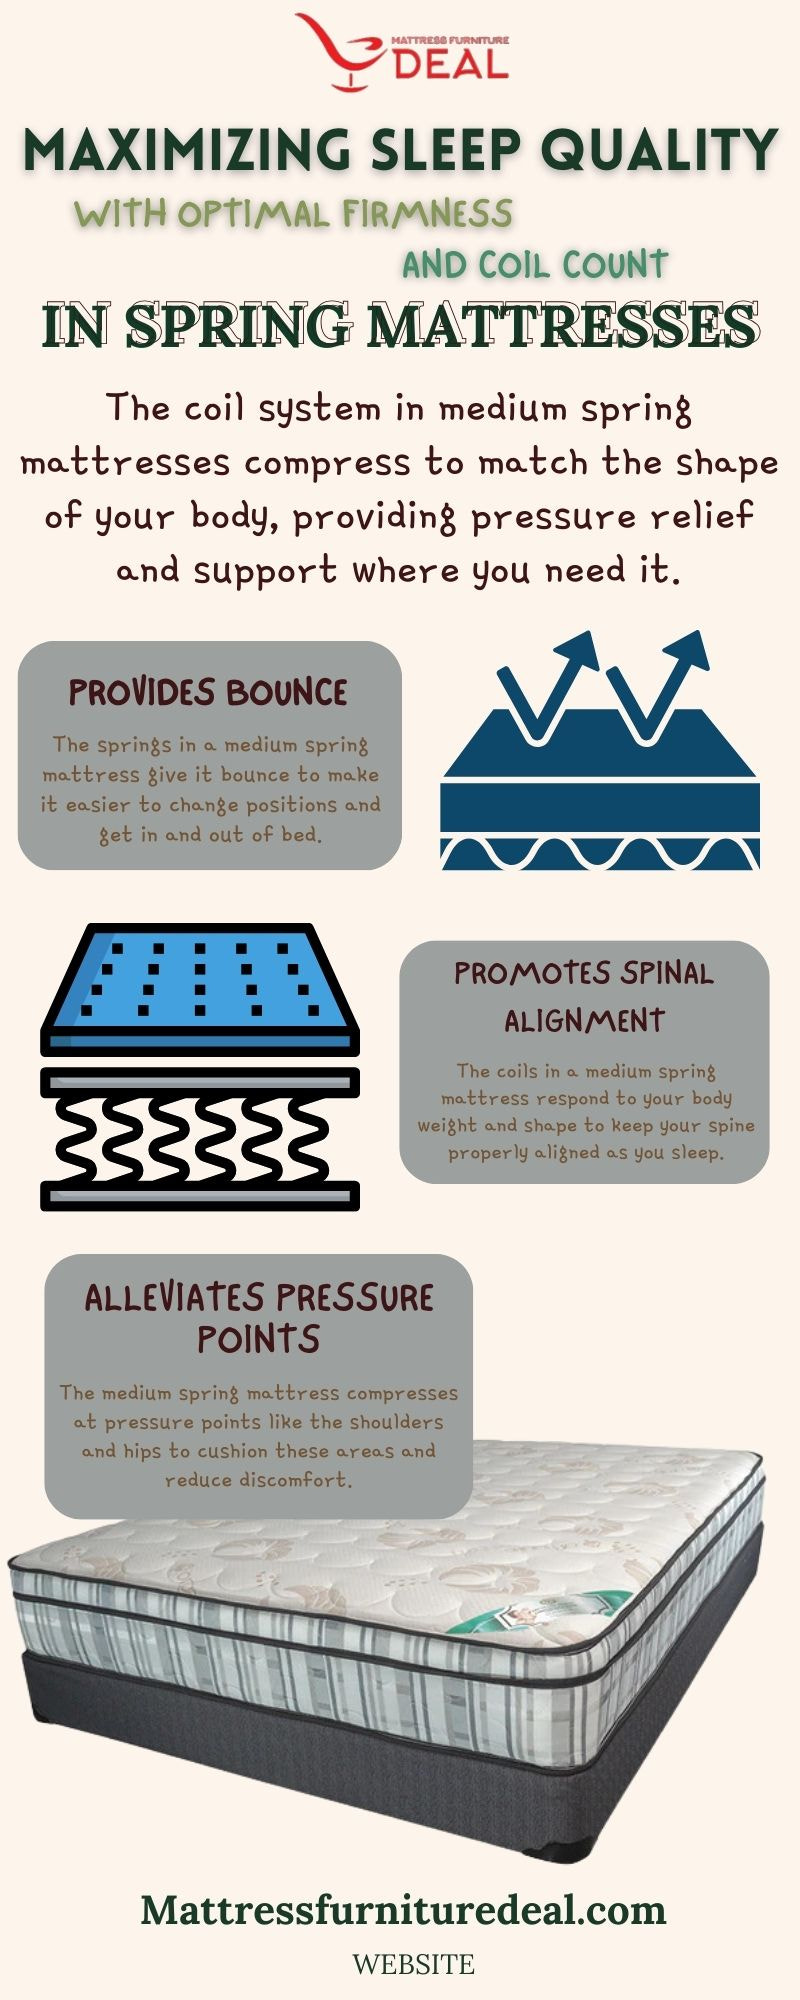 Maximizing Sleep Quality with Optimal Firmness and Coil Count in Spring Mattresses - 1